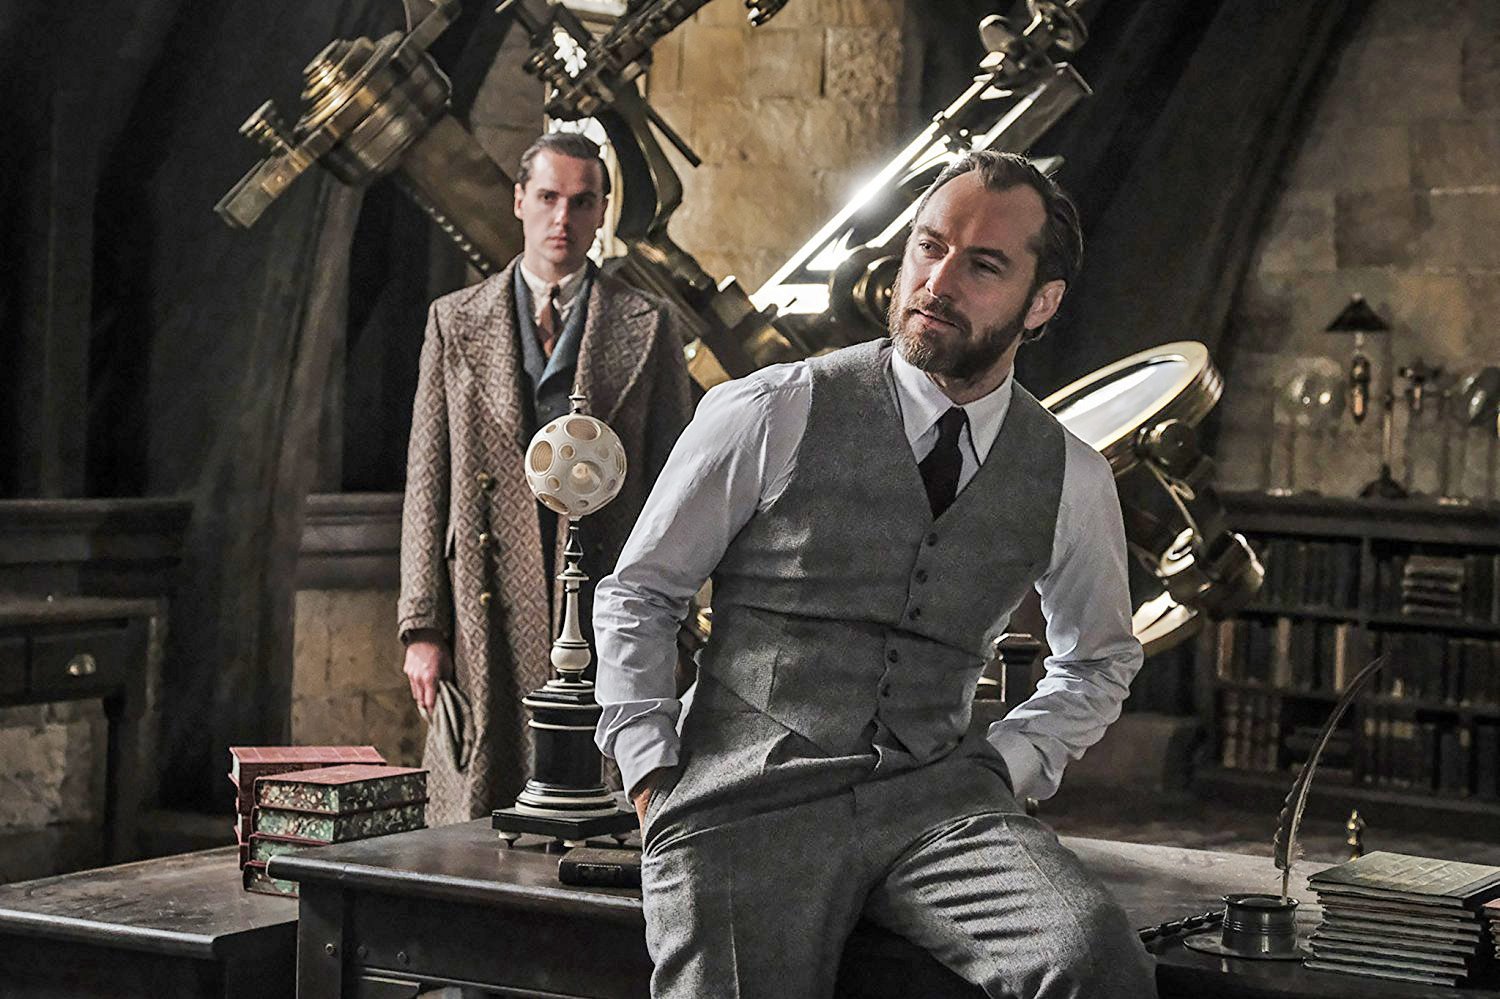 New look at Jude Law as Dumbledore in Fantastic Beasts 2